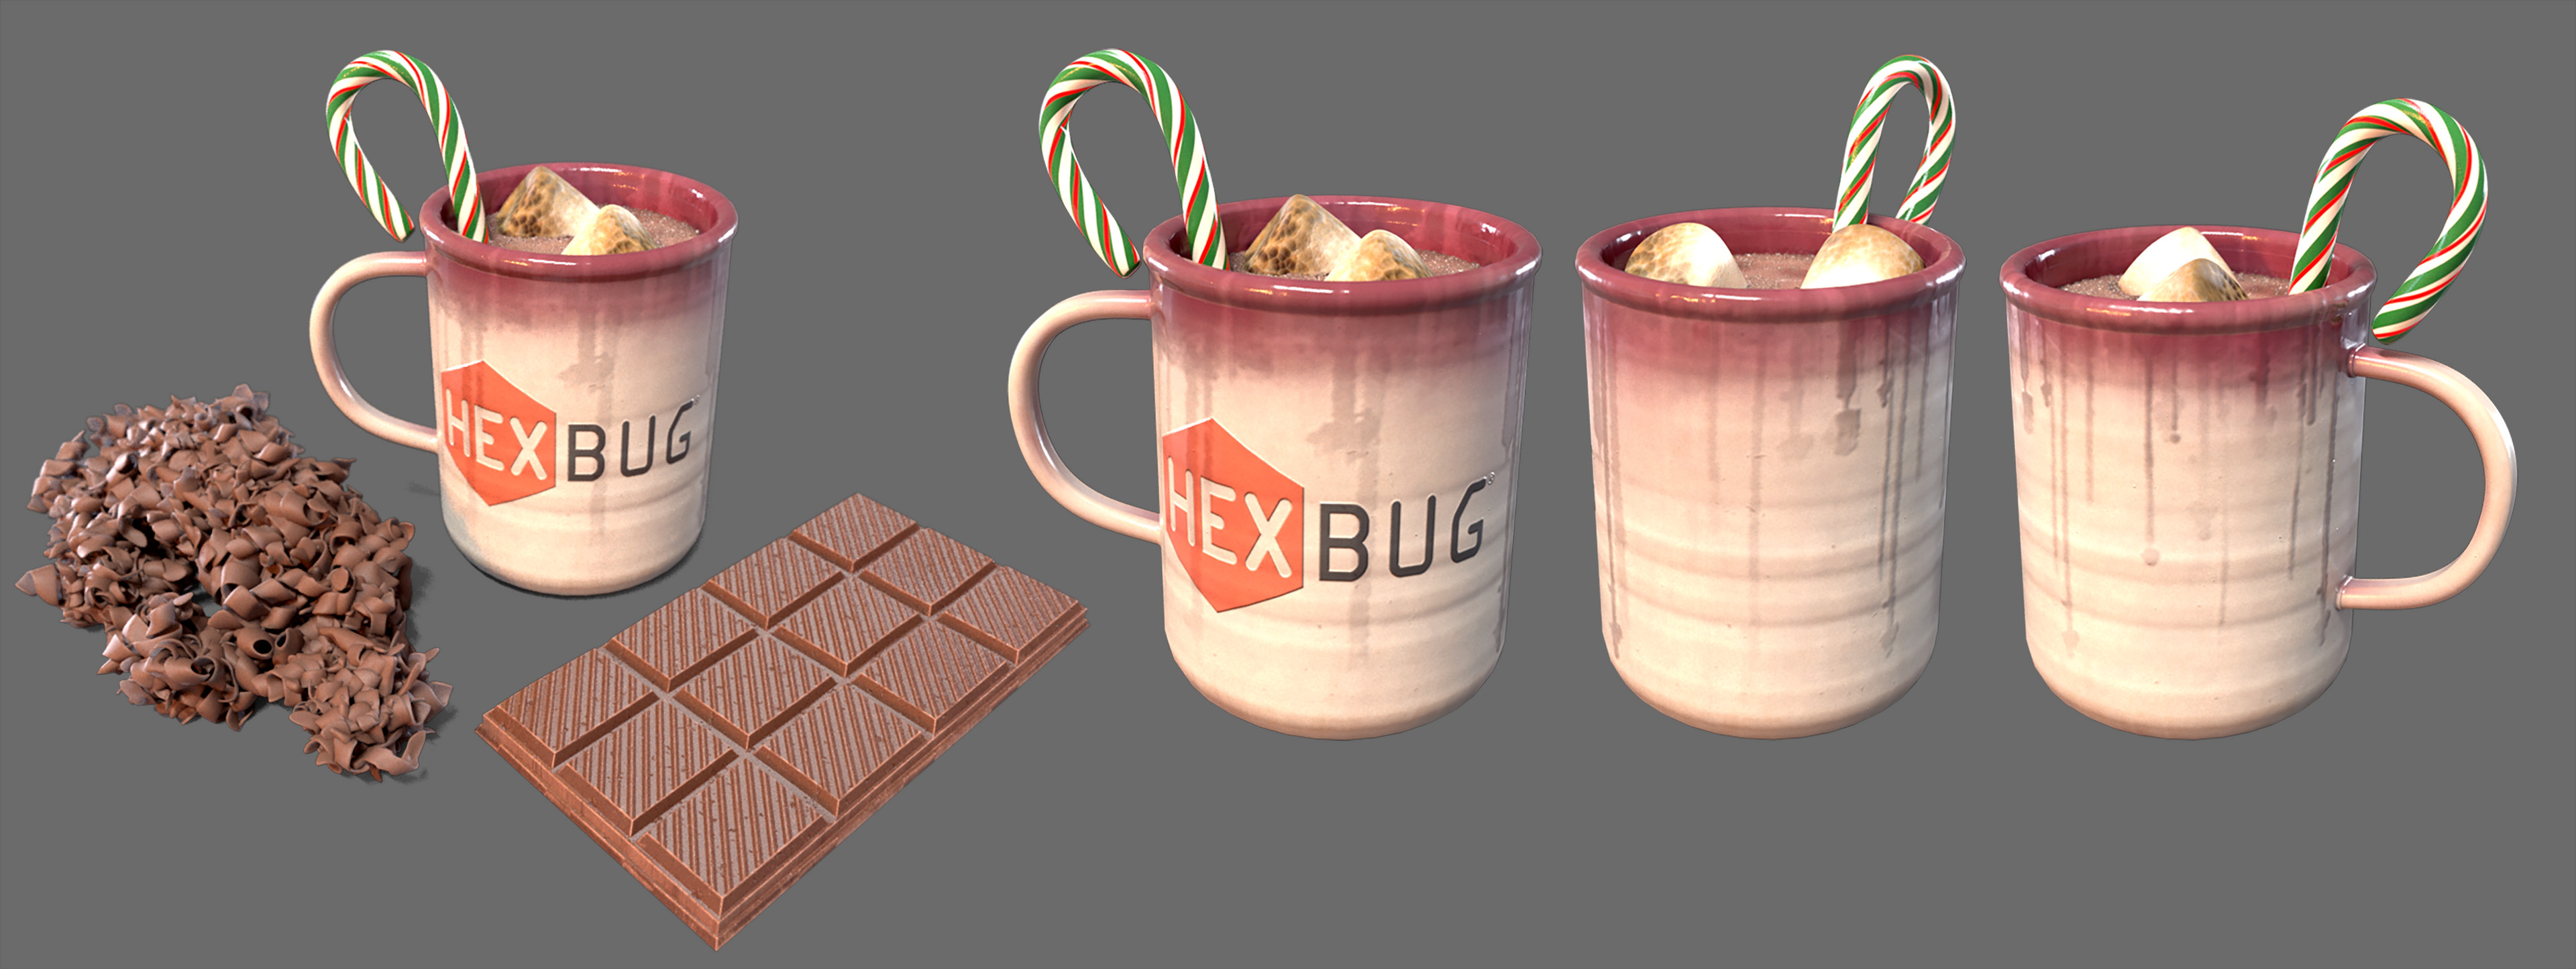 Responsible for texturing all assets and modeling chocolate, candy cane, and marshmallows.  Mug model by Hannah Kuehn.